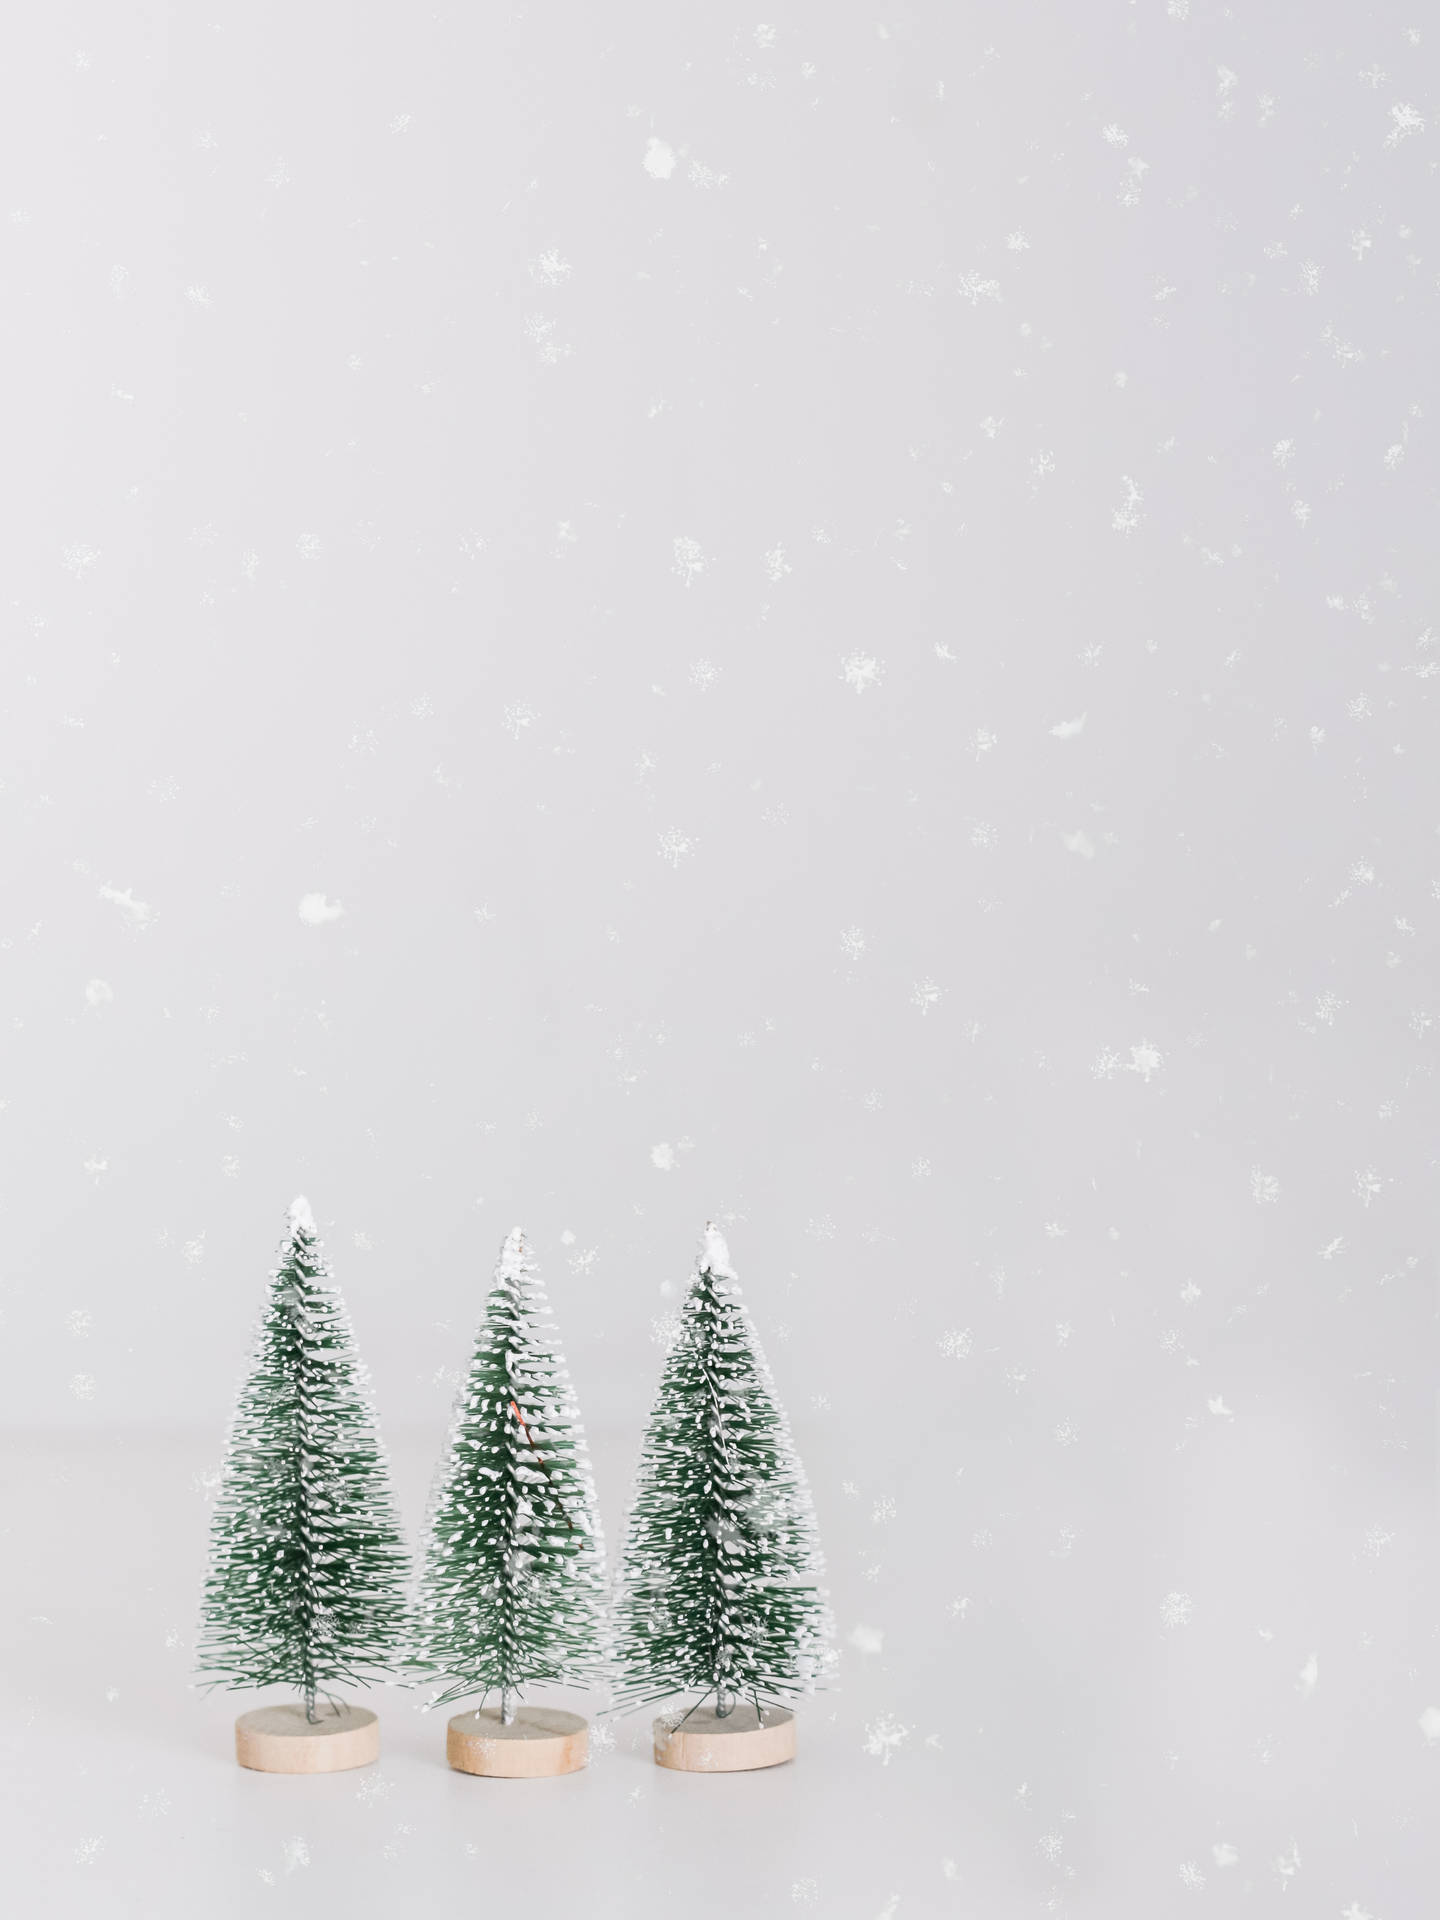 3290X4387 Christmas Tree Wallpaper and Background